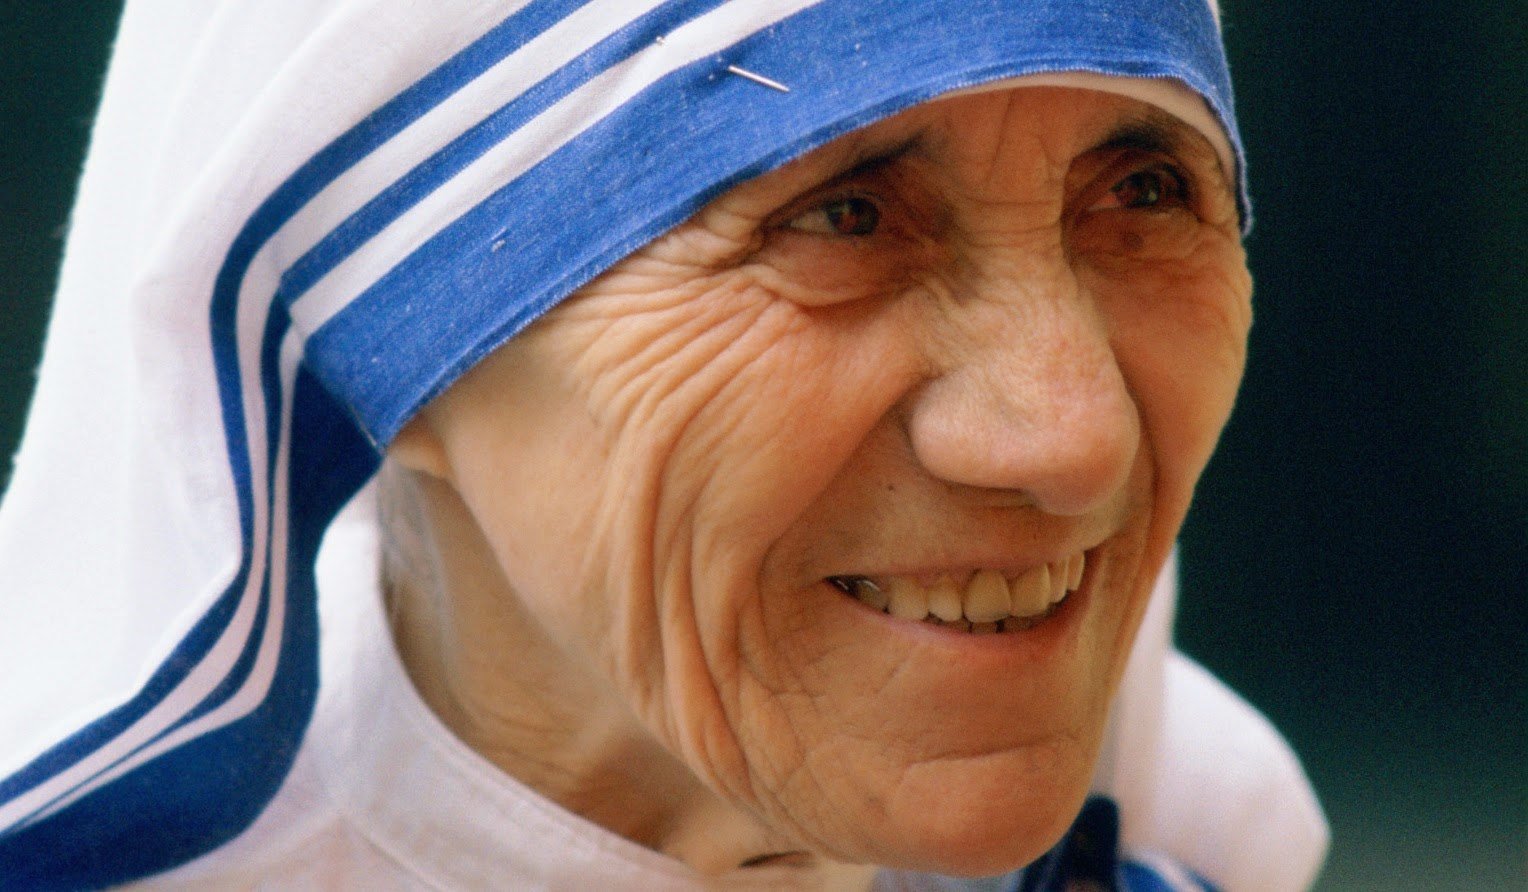 Quotes From Mother Teresa That Can Change The Way You Think Of People